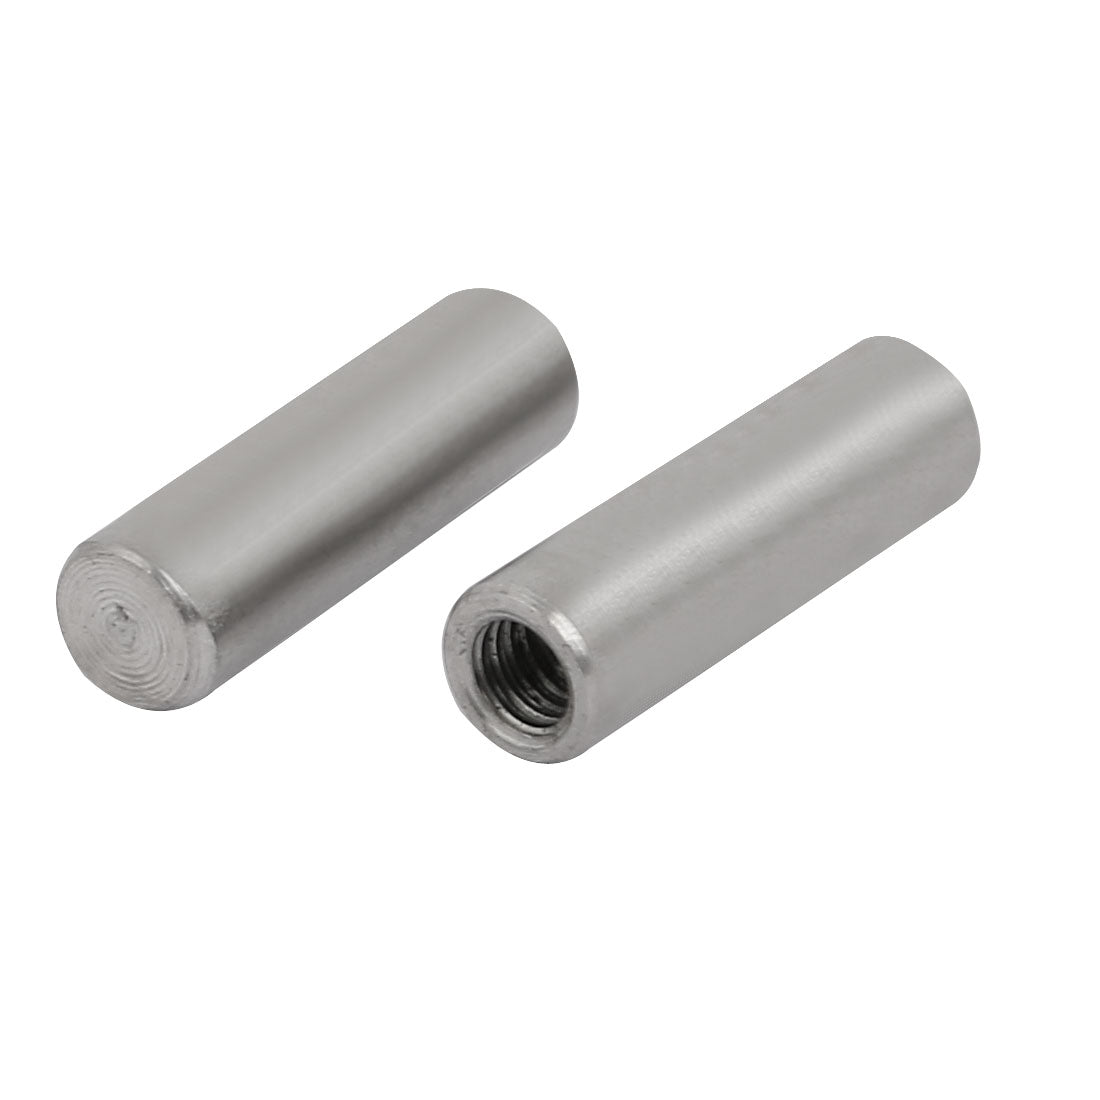 uxcell Uxcell 304 Stainless Steel M4 Female Thread 6mm x 20mm Cylindrical Dowel Pin 2pcs